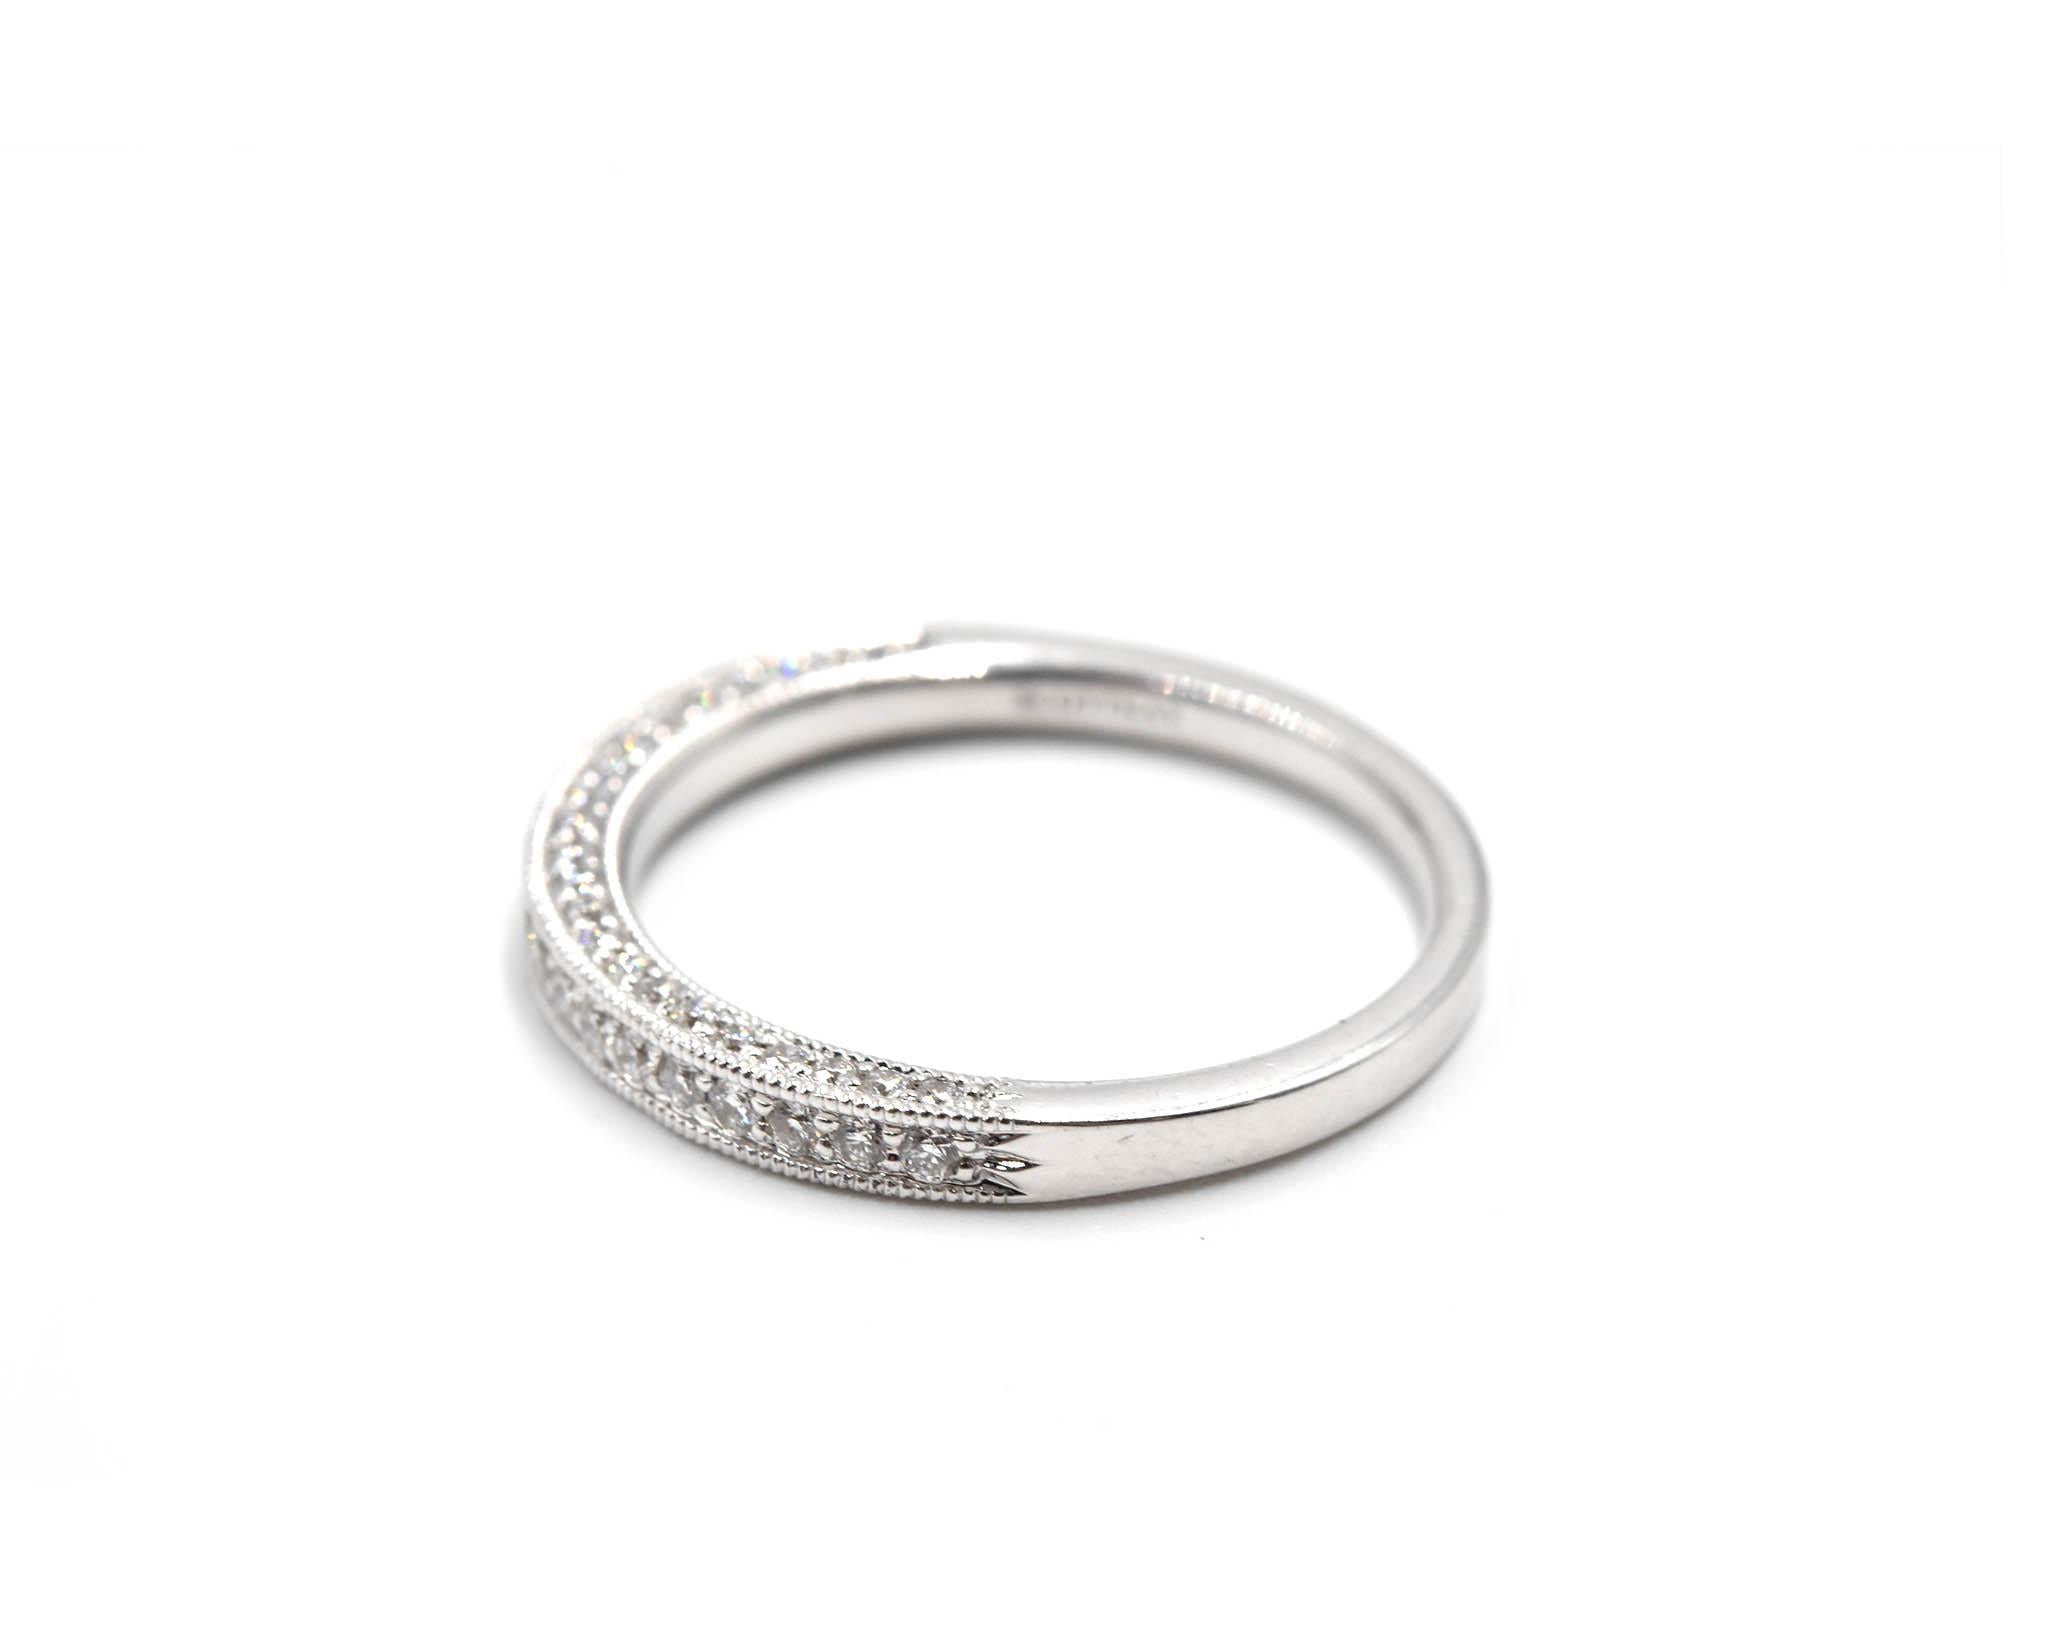 Designer: Scott Kay
Material: 14k white gold
Diamonds: 64 round brilliant cut diamonds = 0.50 carat total weight
Color: G-H
Clarity: VS2
Dimensions: band is 2.38mm wide
Ring size: 6 1/2 (please allow two additional shipping days for sizing